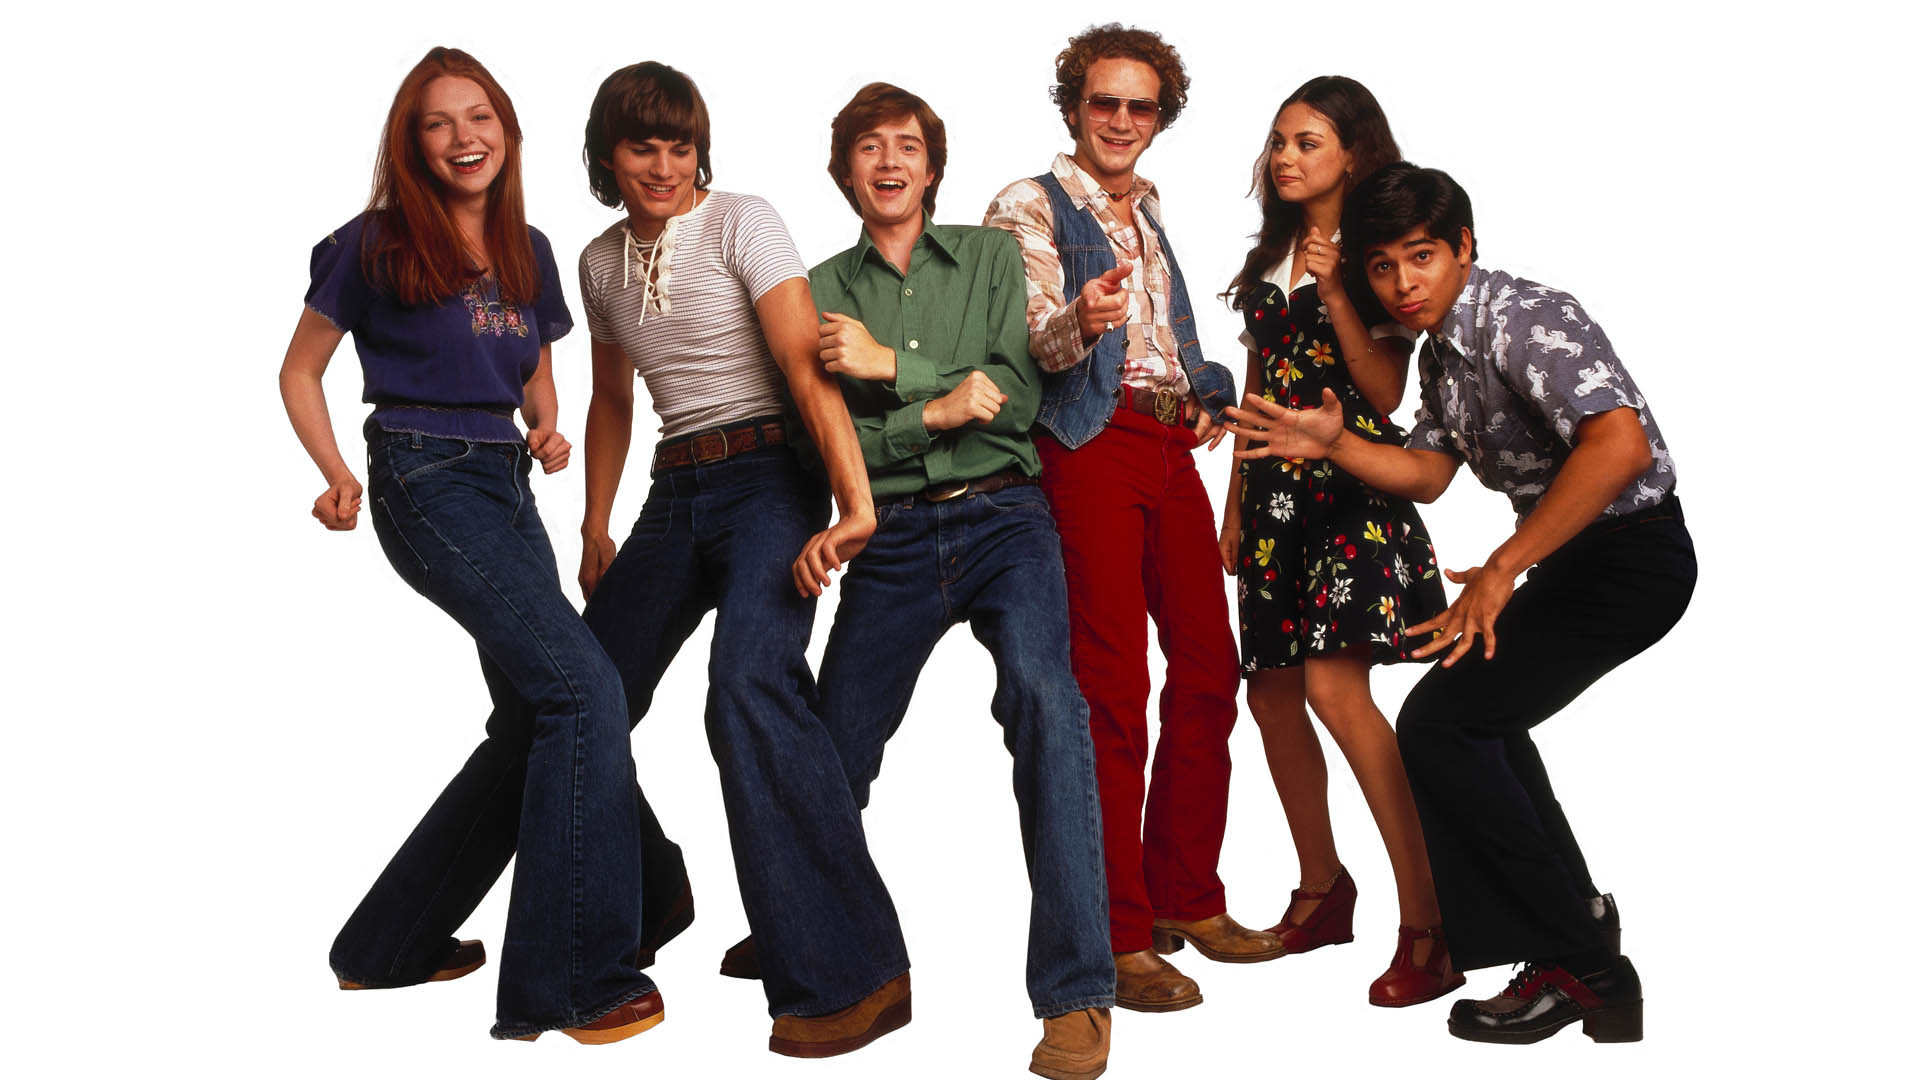 1920x1080 Related Wallpapers from Glee Pictures. That 70s Show